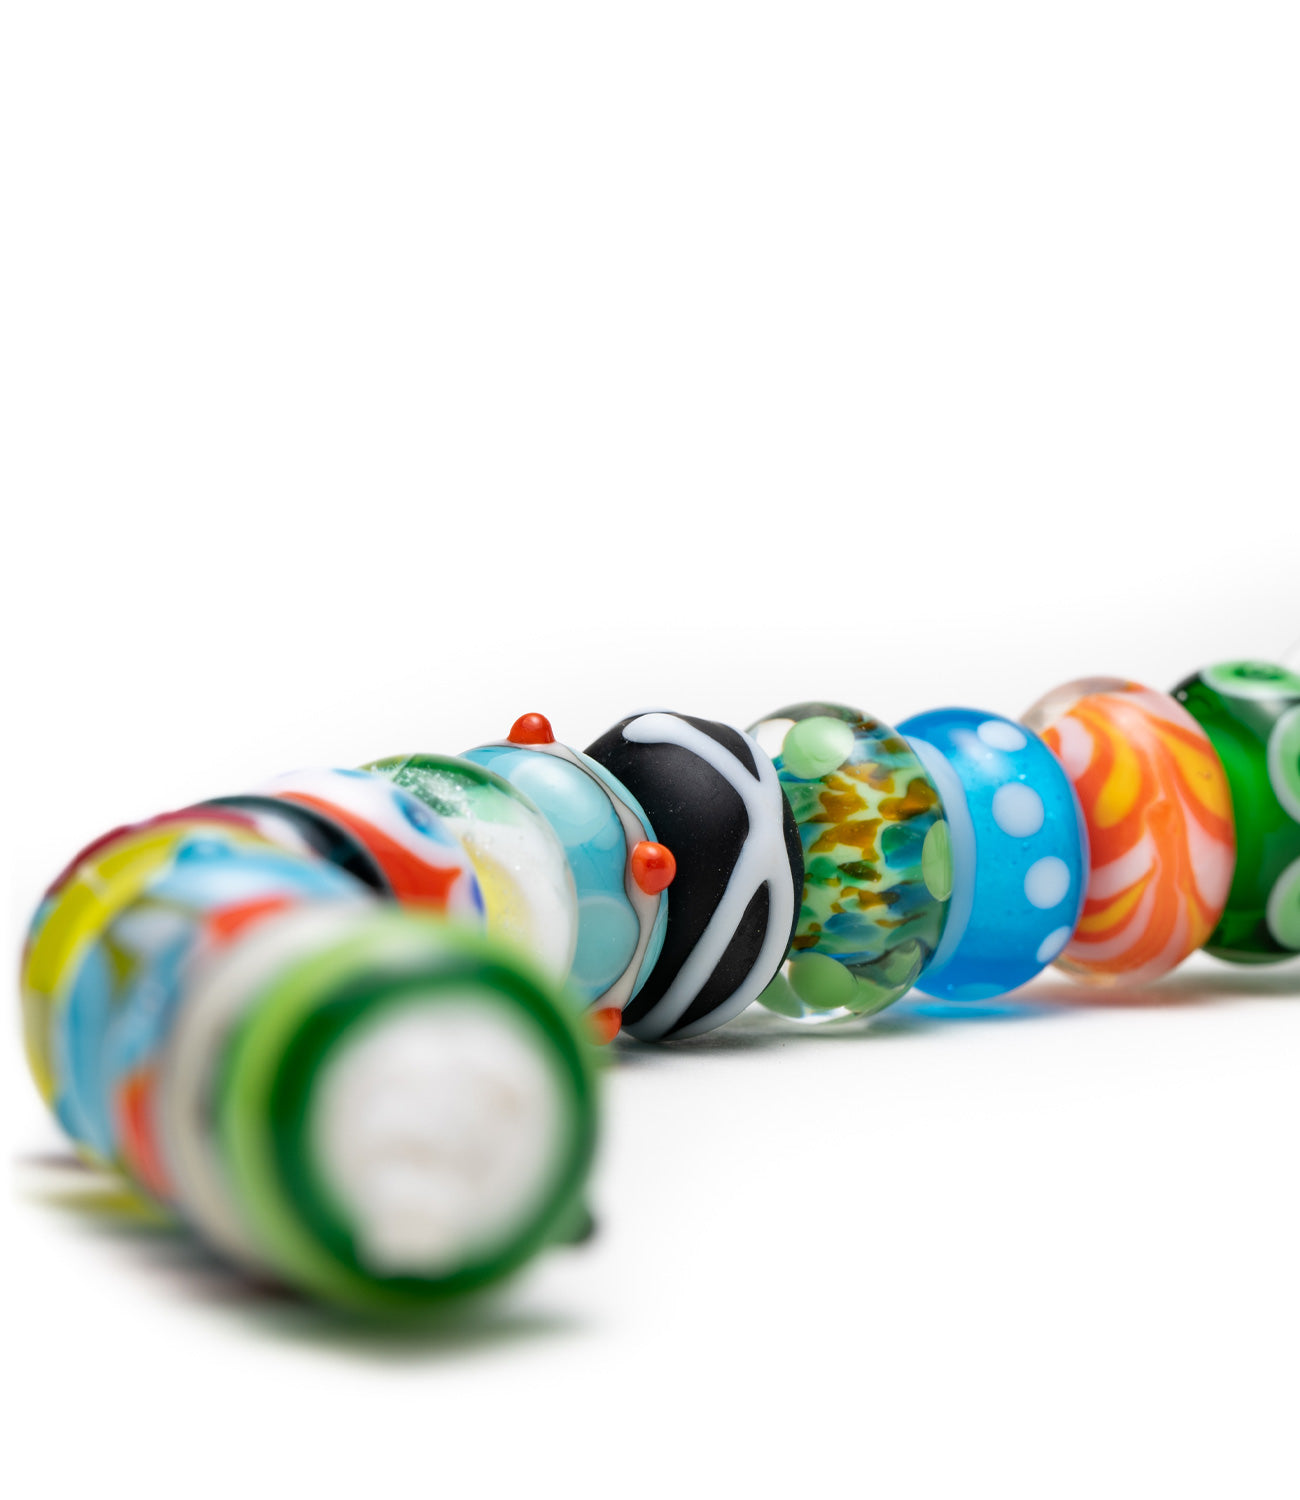 Bright, colourful Murano glass beads in a row.